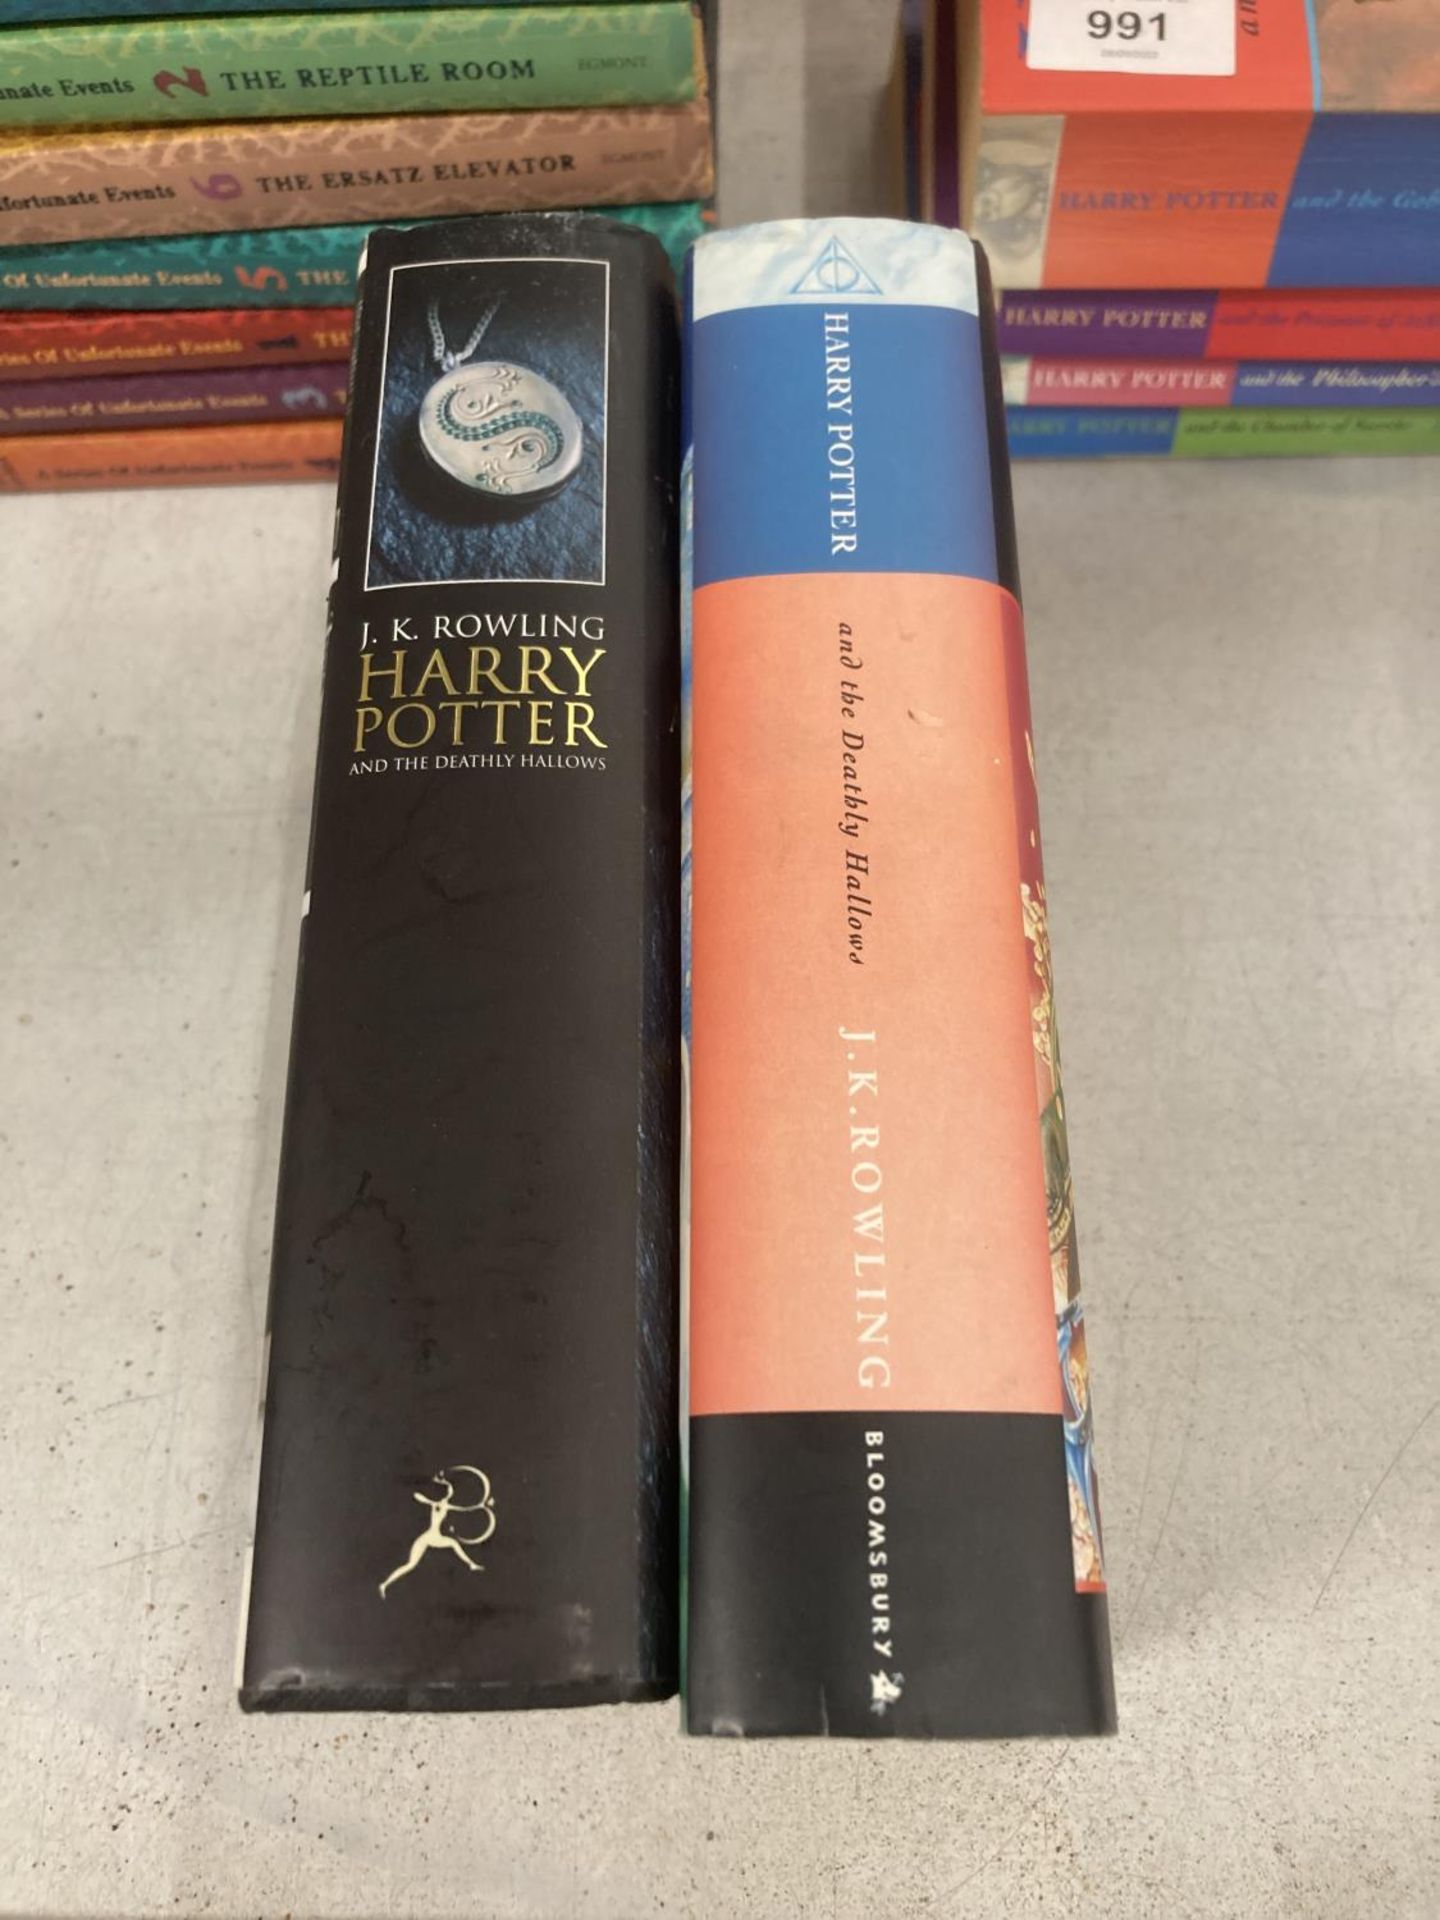 TWO FIRST EDITION HARDBACKS HARRY POTTER AND THE DEATHLY HALLOWS BY J.K ROWLING WITH DUSTOCVERS BOTH - Image 2 of 6